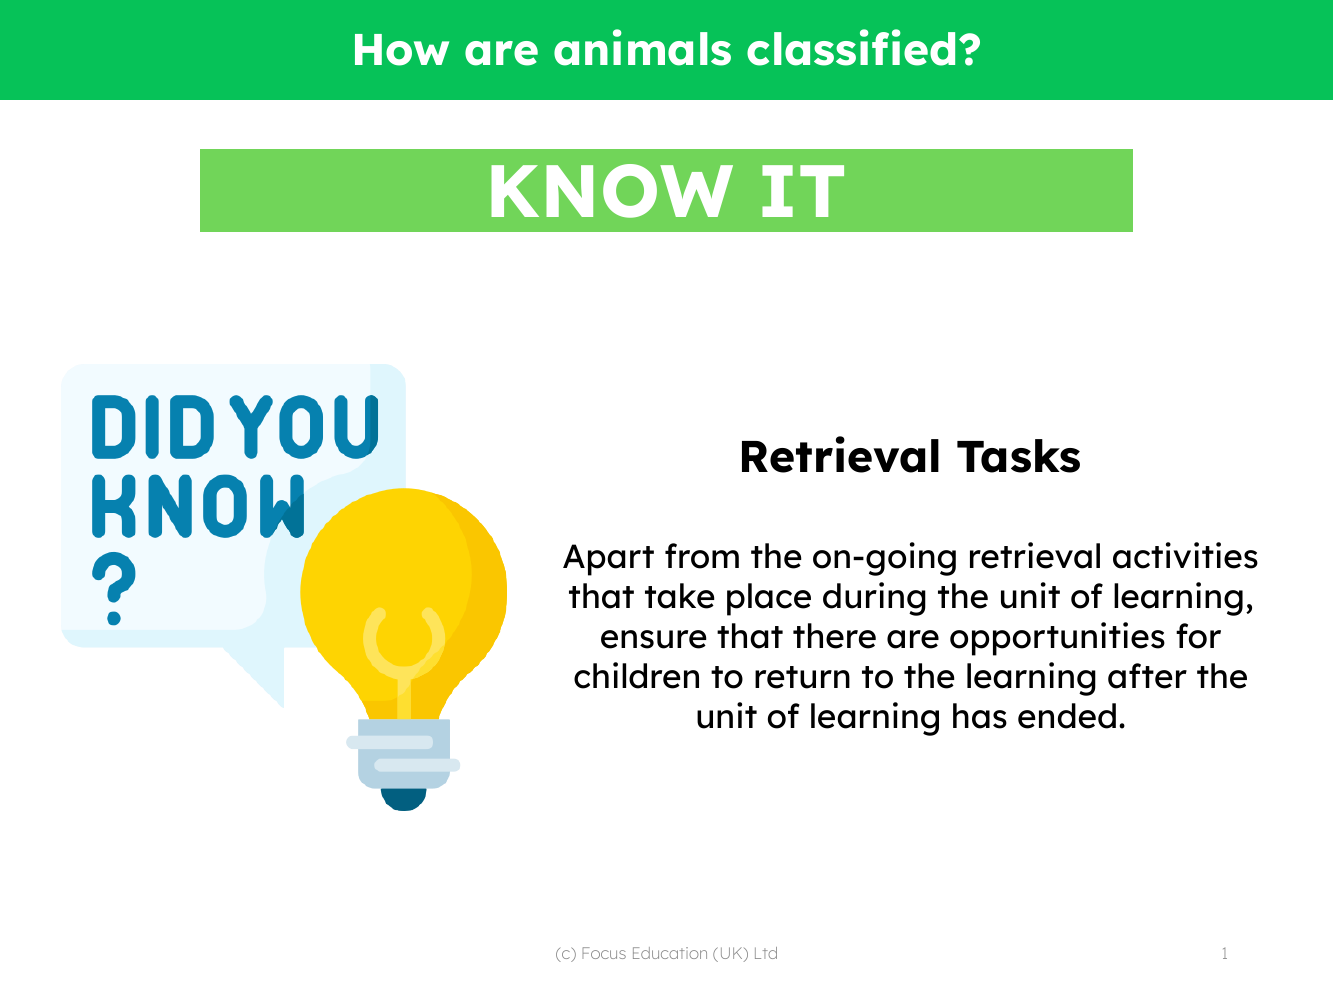 Know it! - How are Animals Classified? - Kindergarten